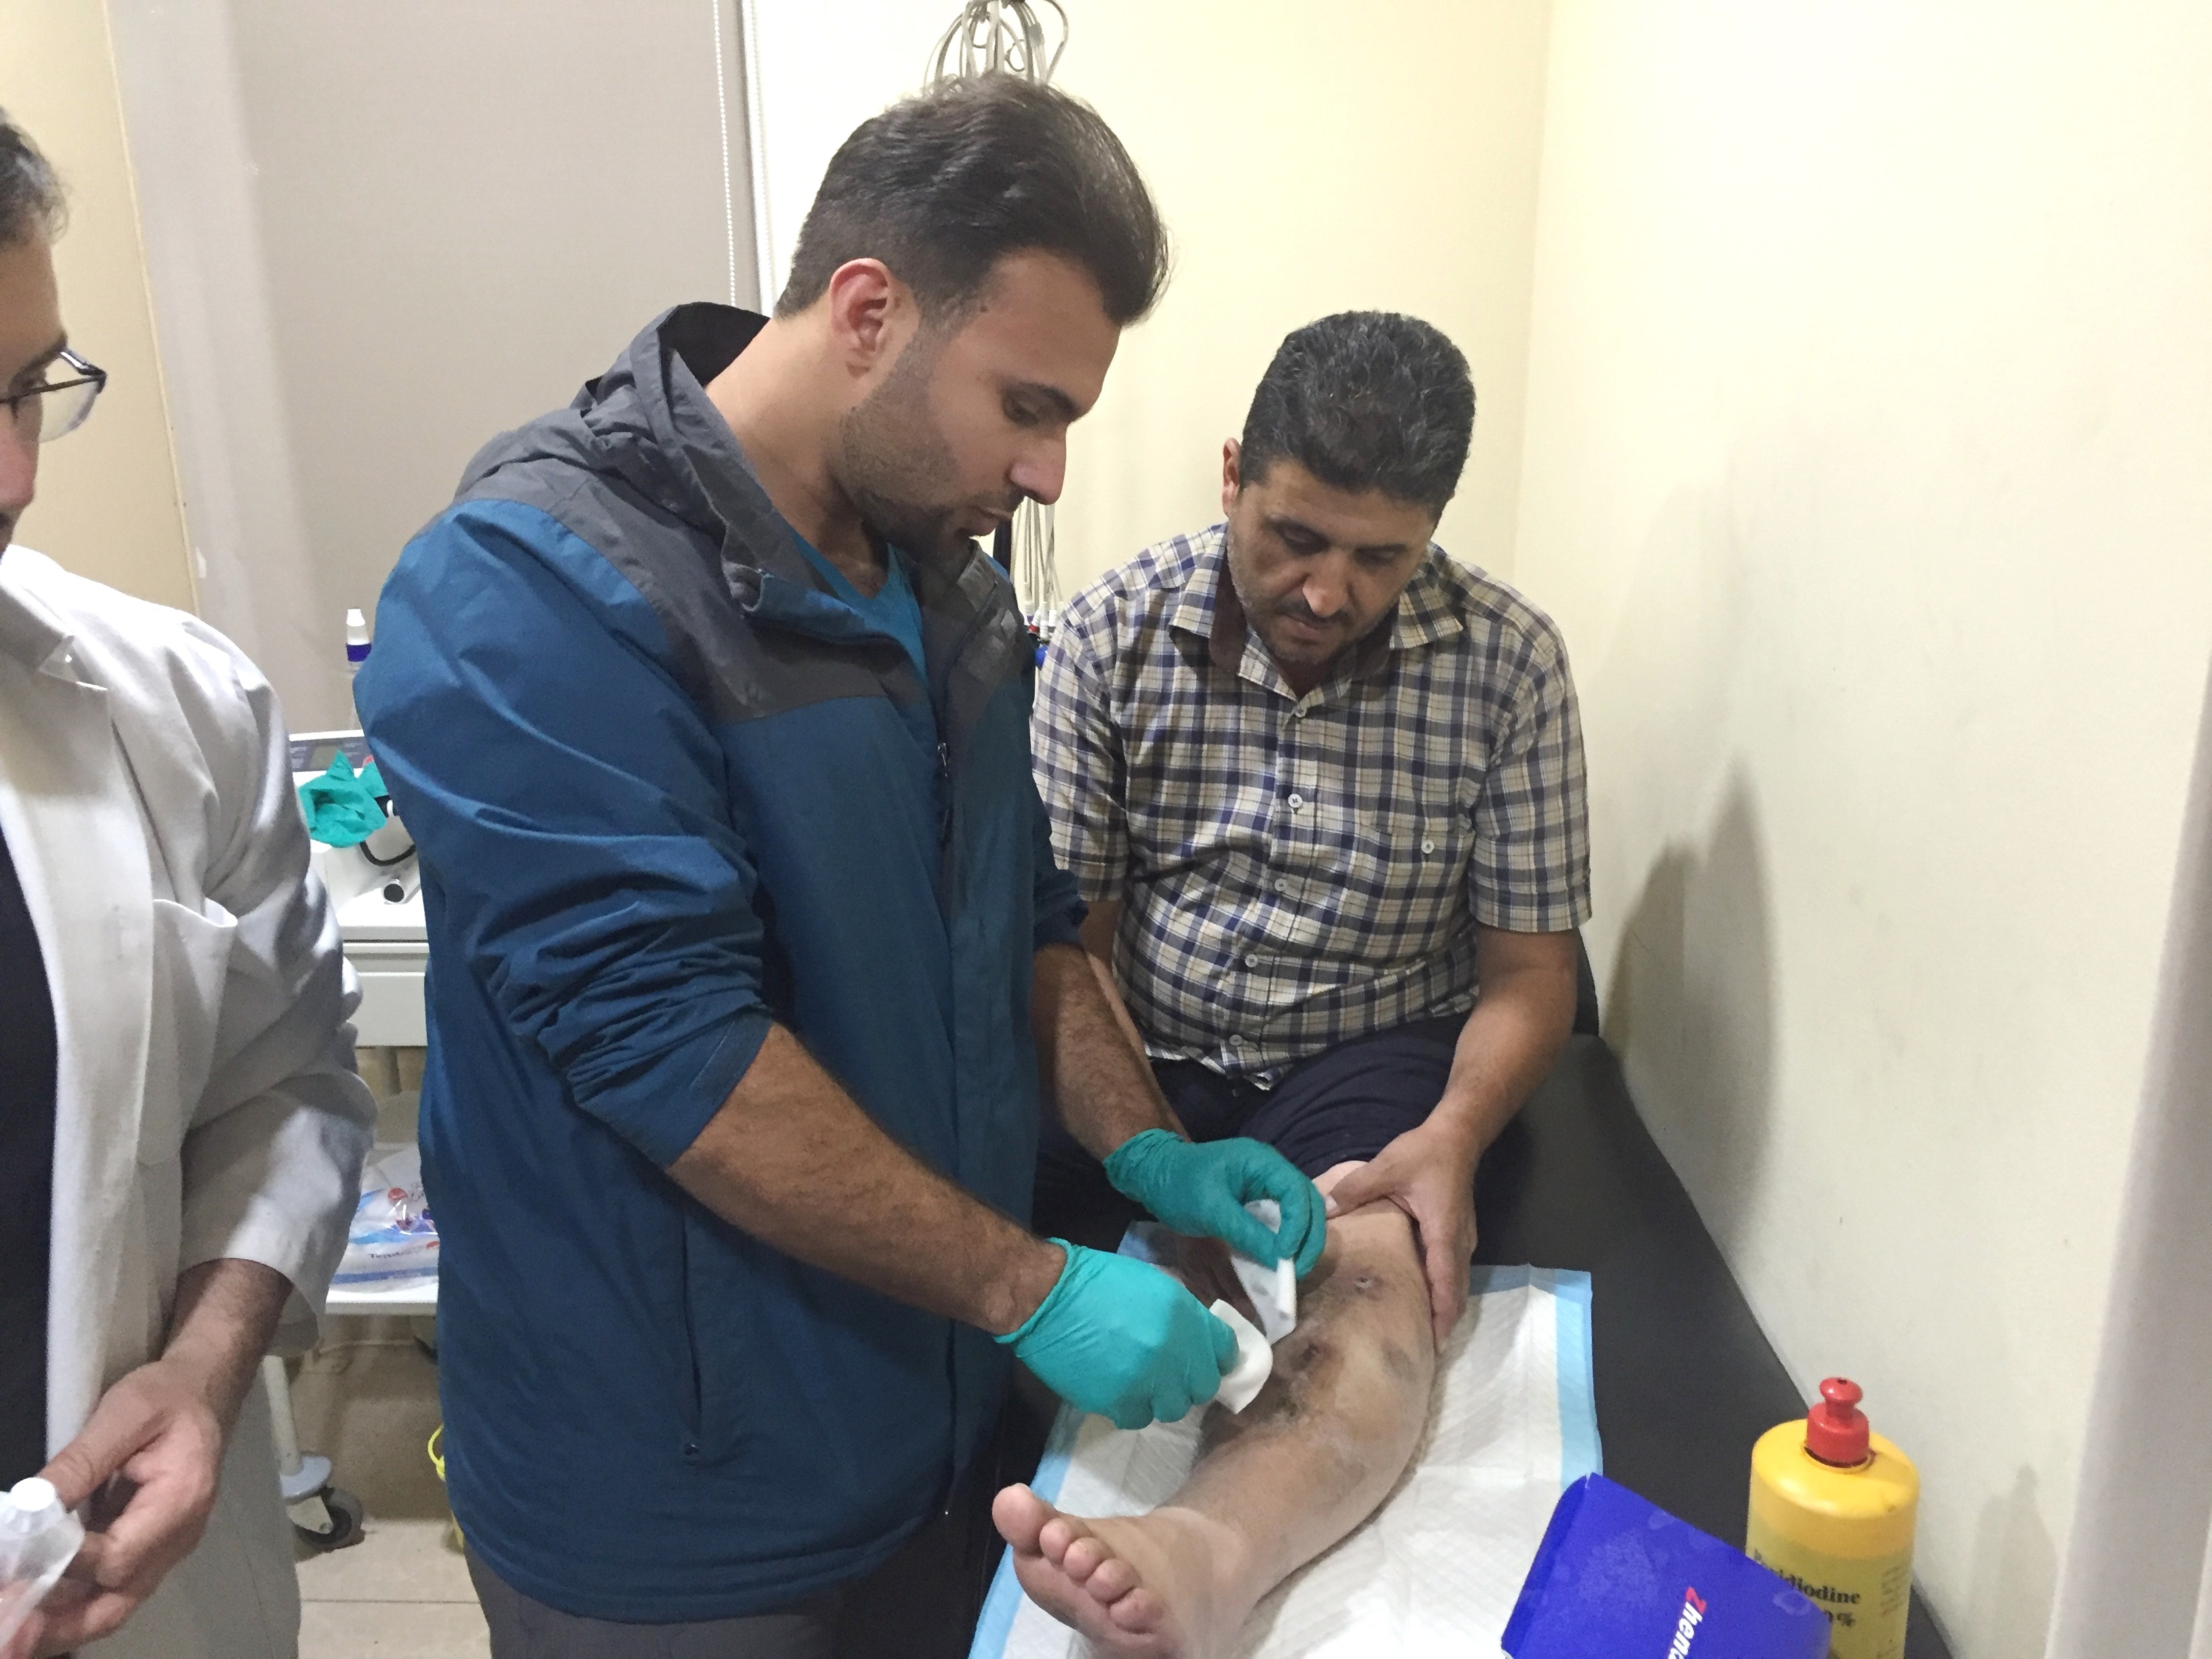 Member of the Kuwaiti Medical Association Dr. Ahmad Al-Mohammad conducts surgeries for displaced Syrians in Lebanon